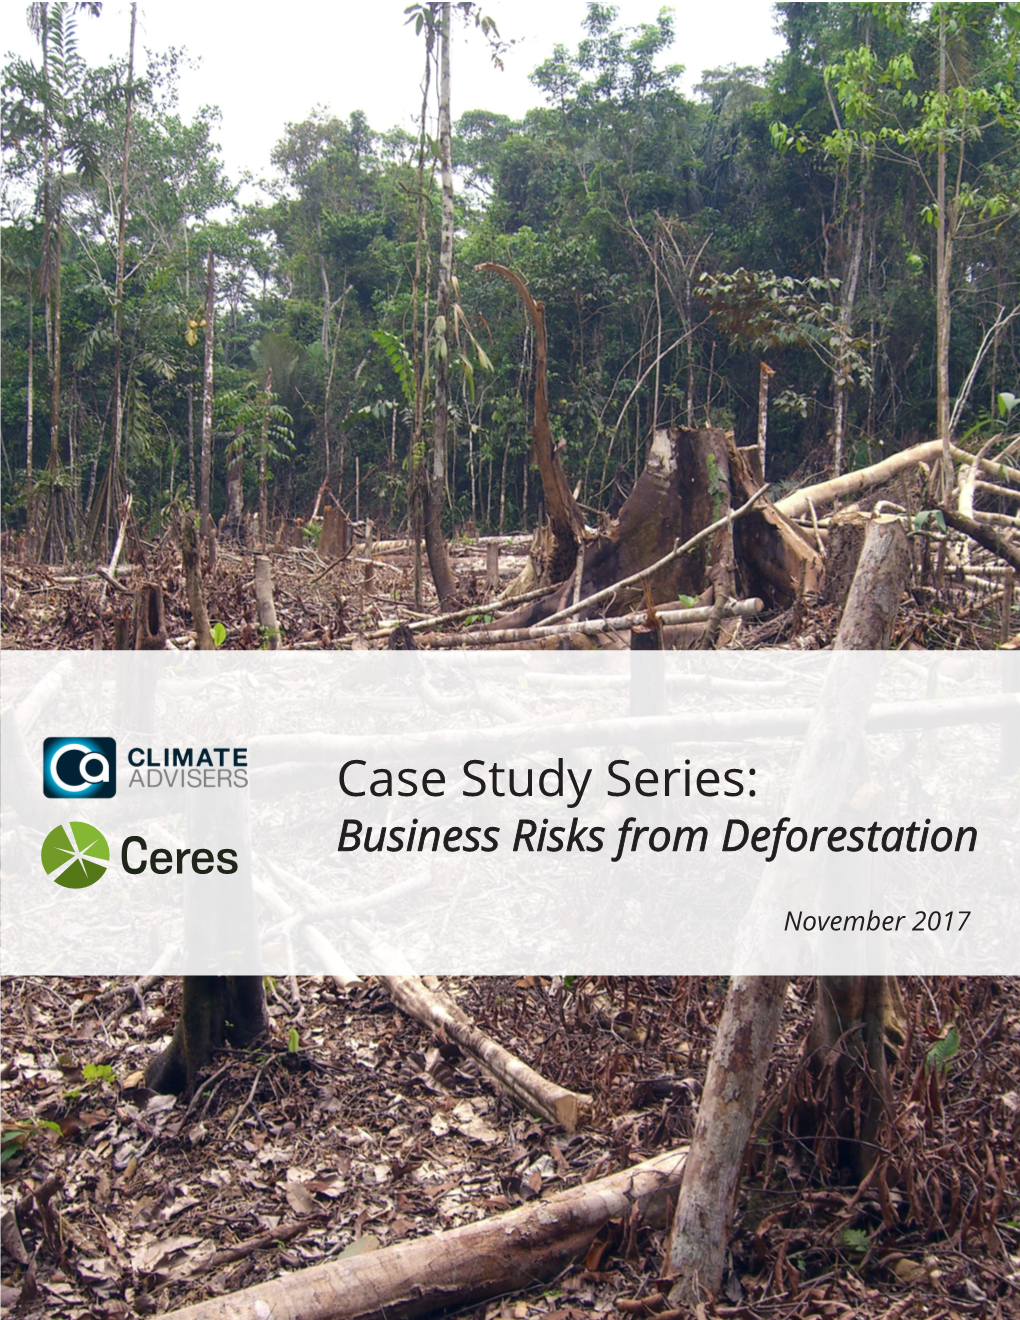 Case Study Series: Business Risks from Deforestation